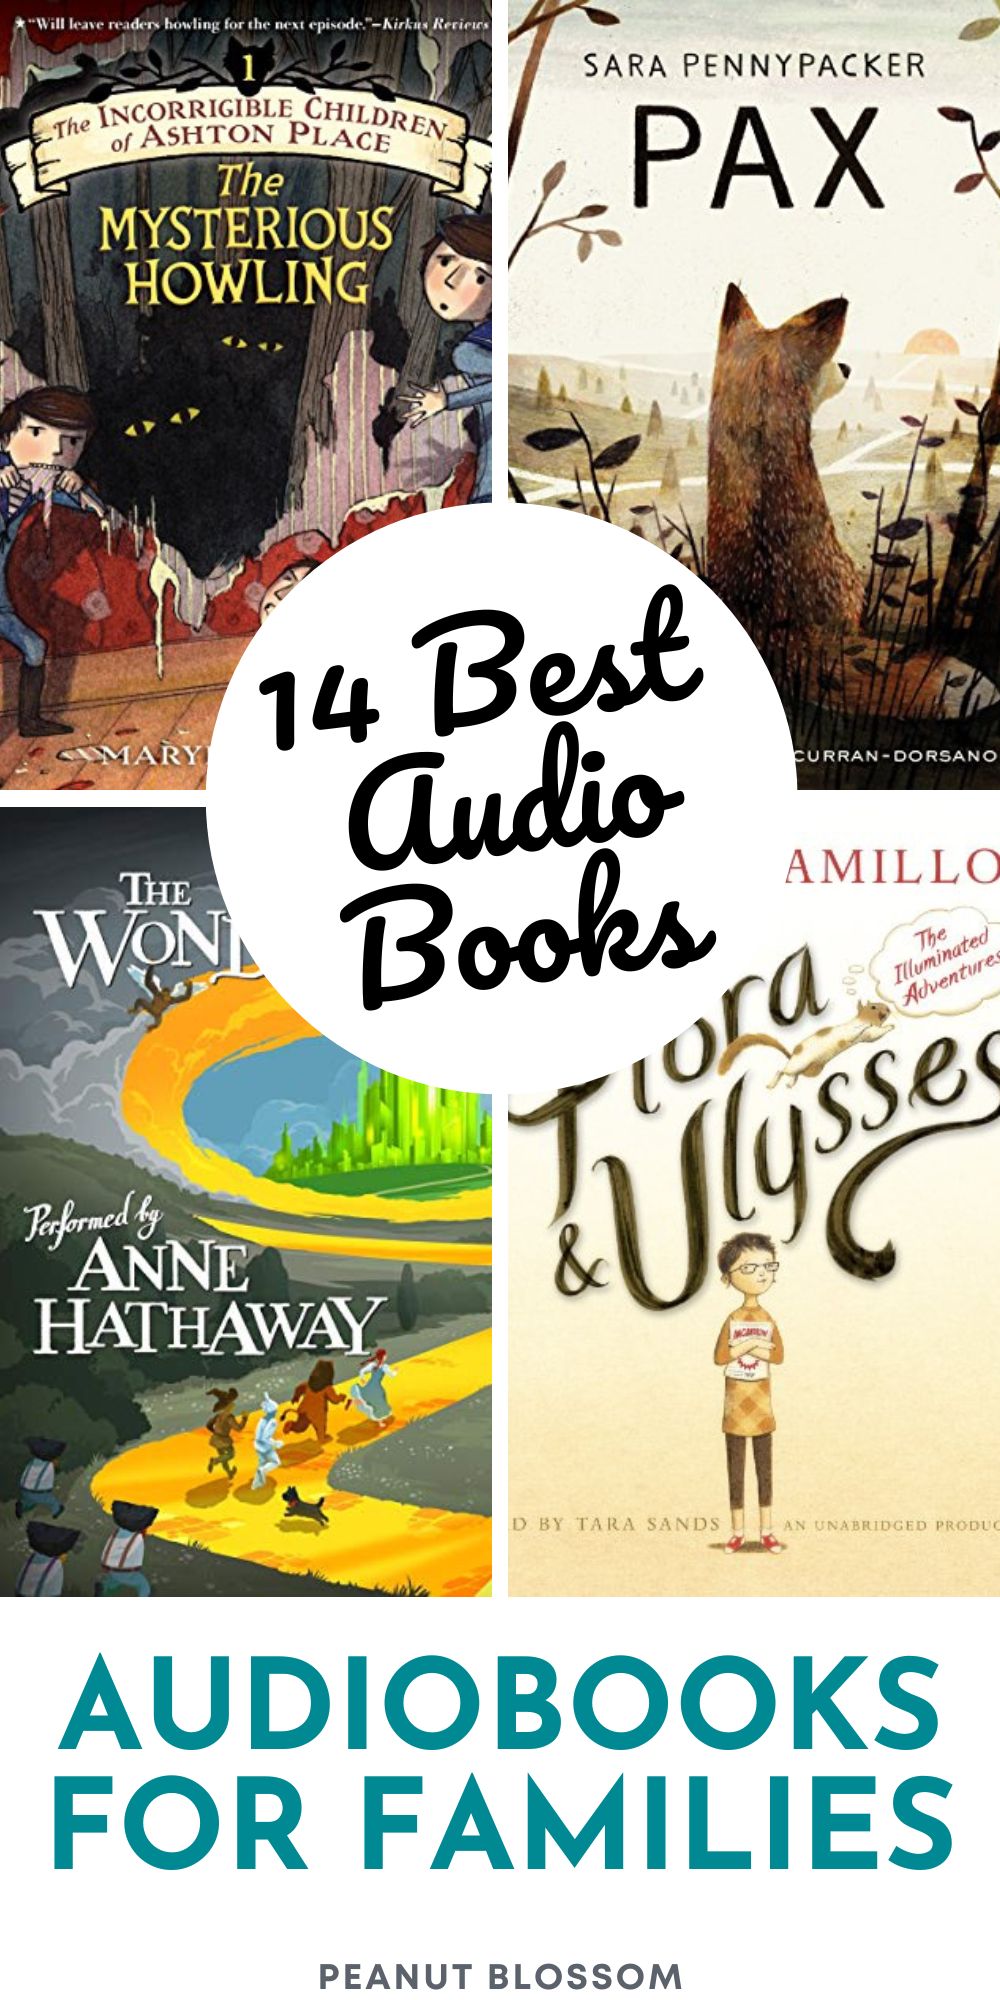 The photo collage shows several best audiobooks for families.